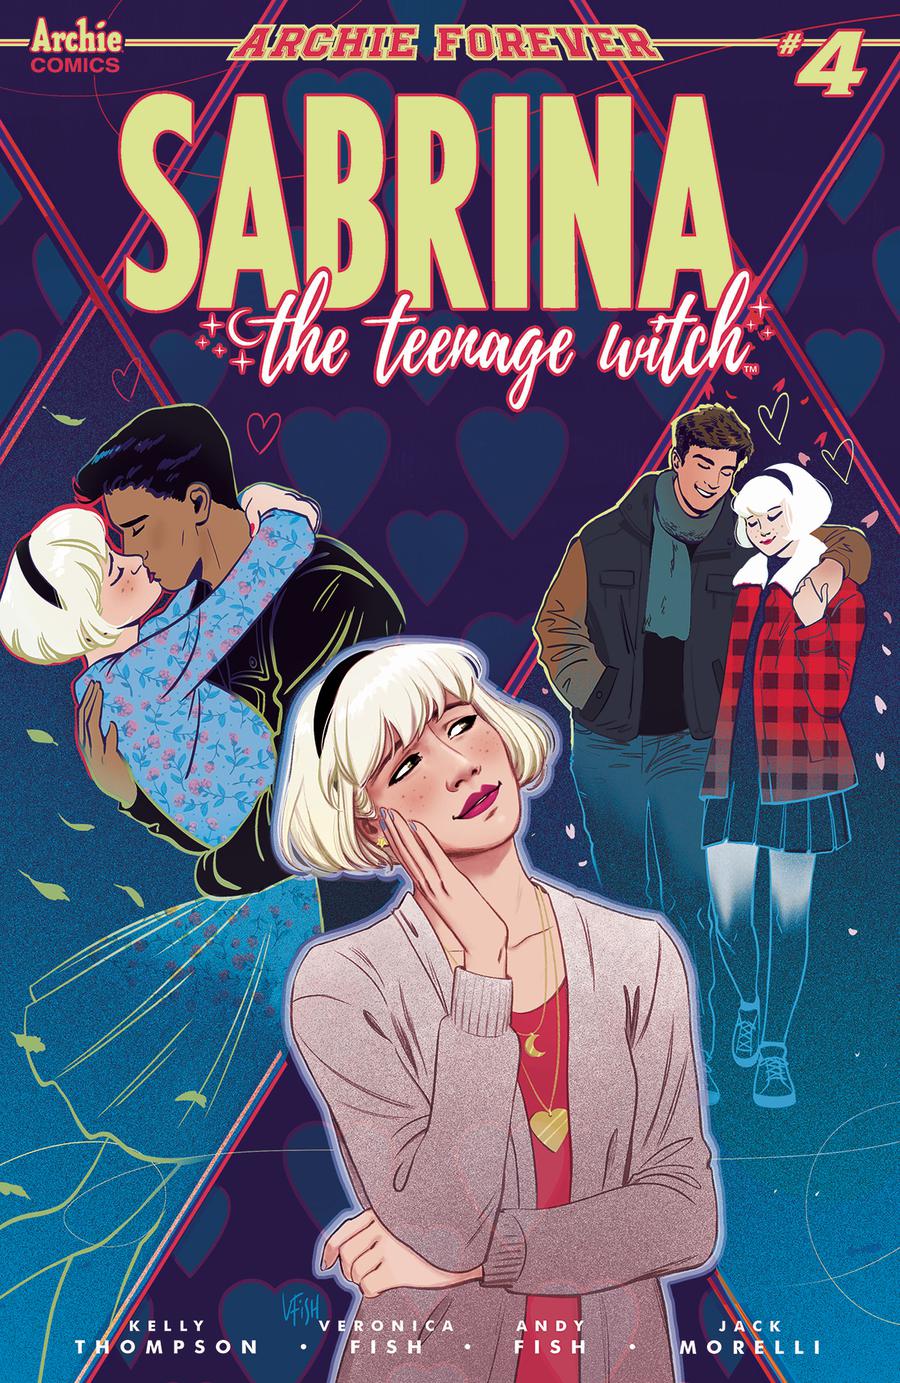 Sabrina The Teenage Witch #4 Cover A Regular Veronica Fish Cover